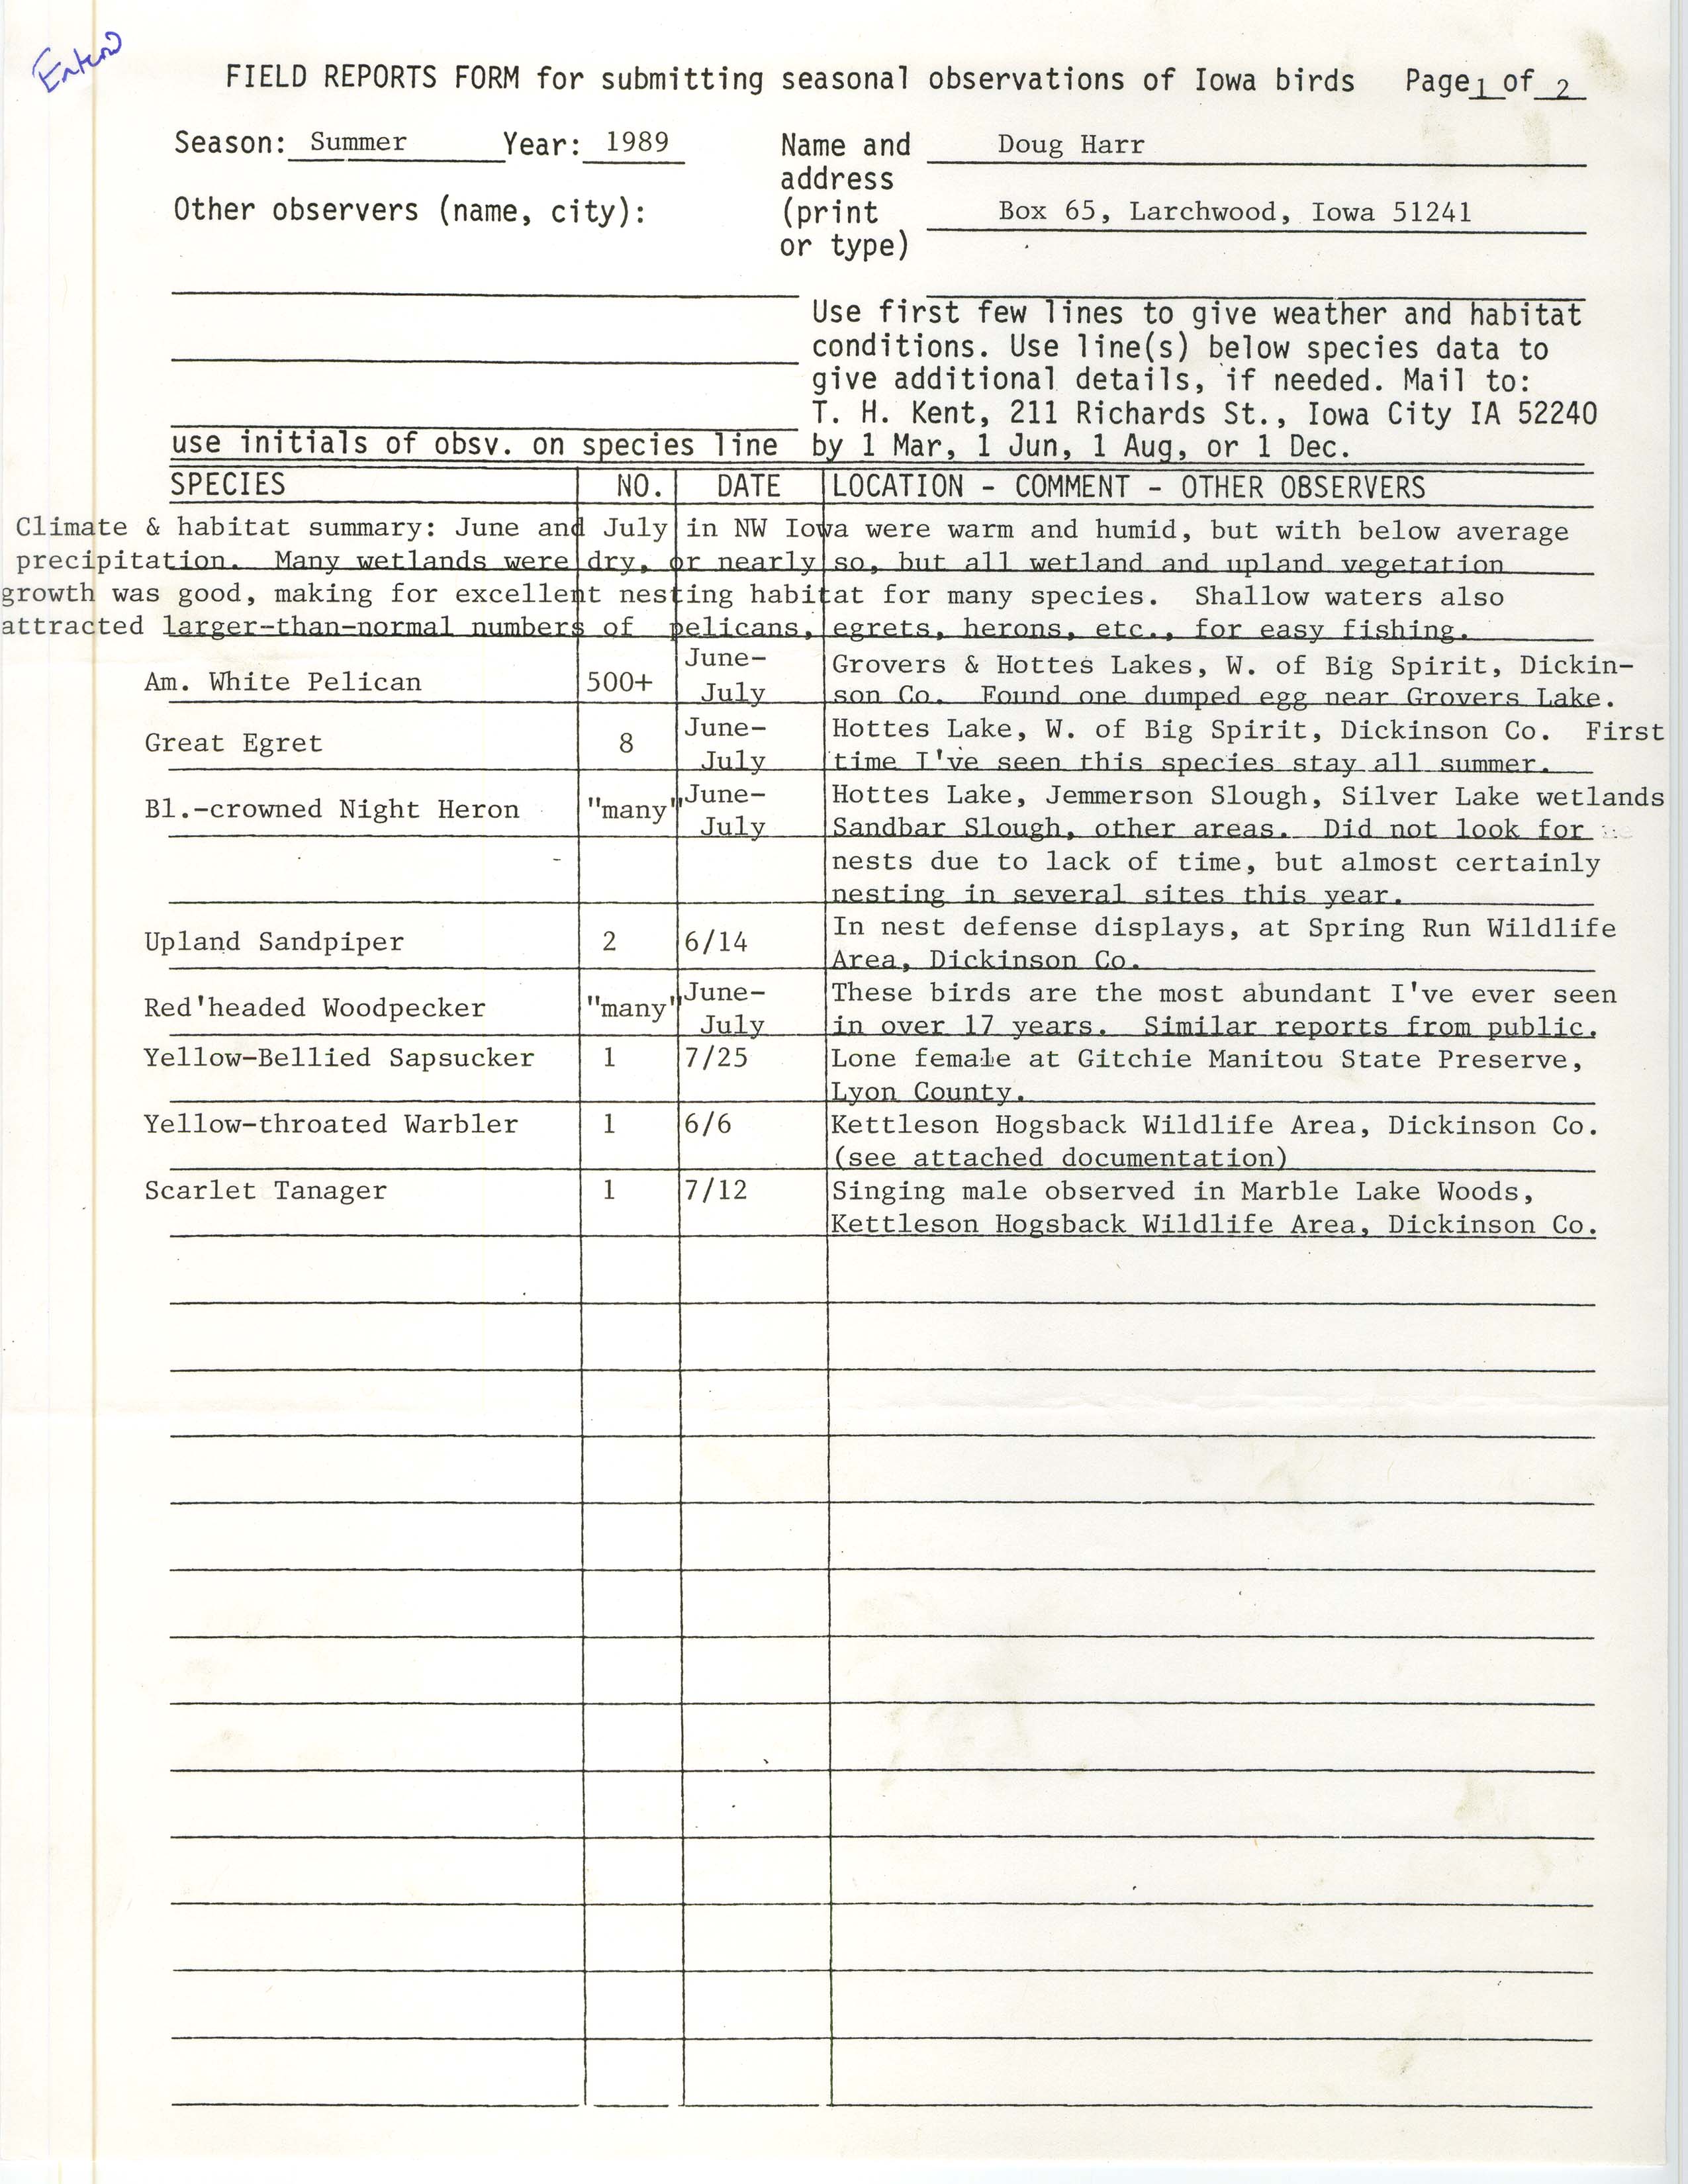 Field reports form for submitting seasonal observations of Iowa birds, Douglas C. Harr, summer 1989